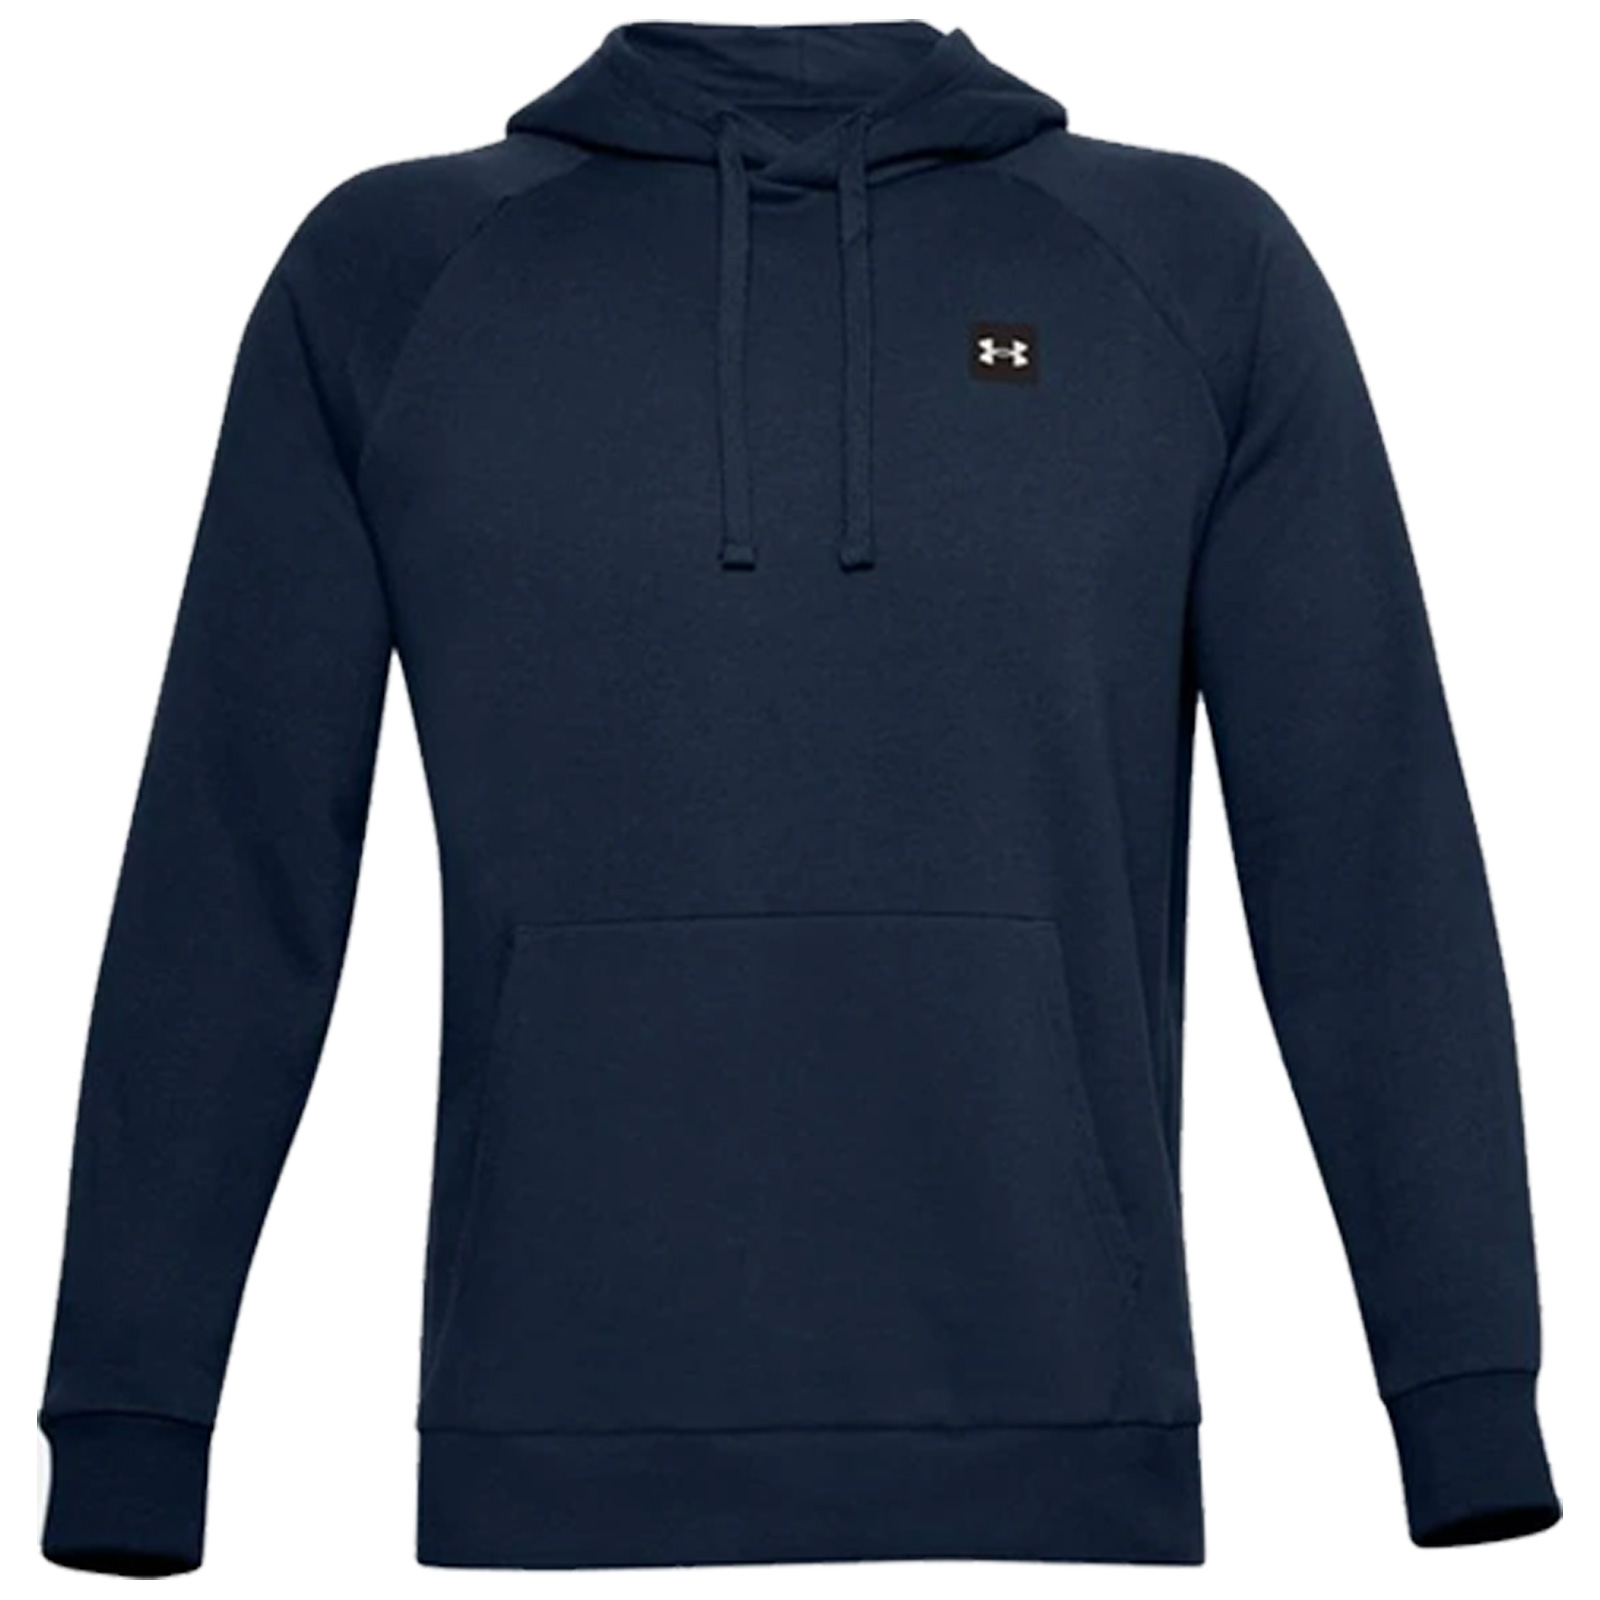 2021 Under Armour Mens Rival Fleece Hoodie Lightweight Brushed Hooded ...